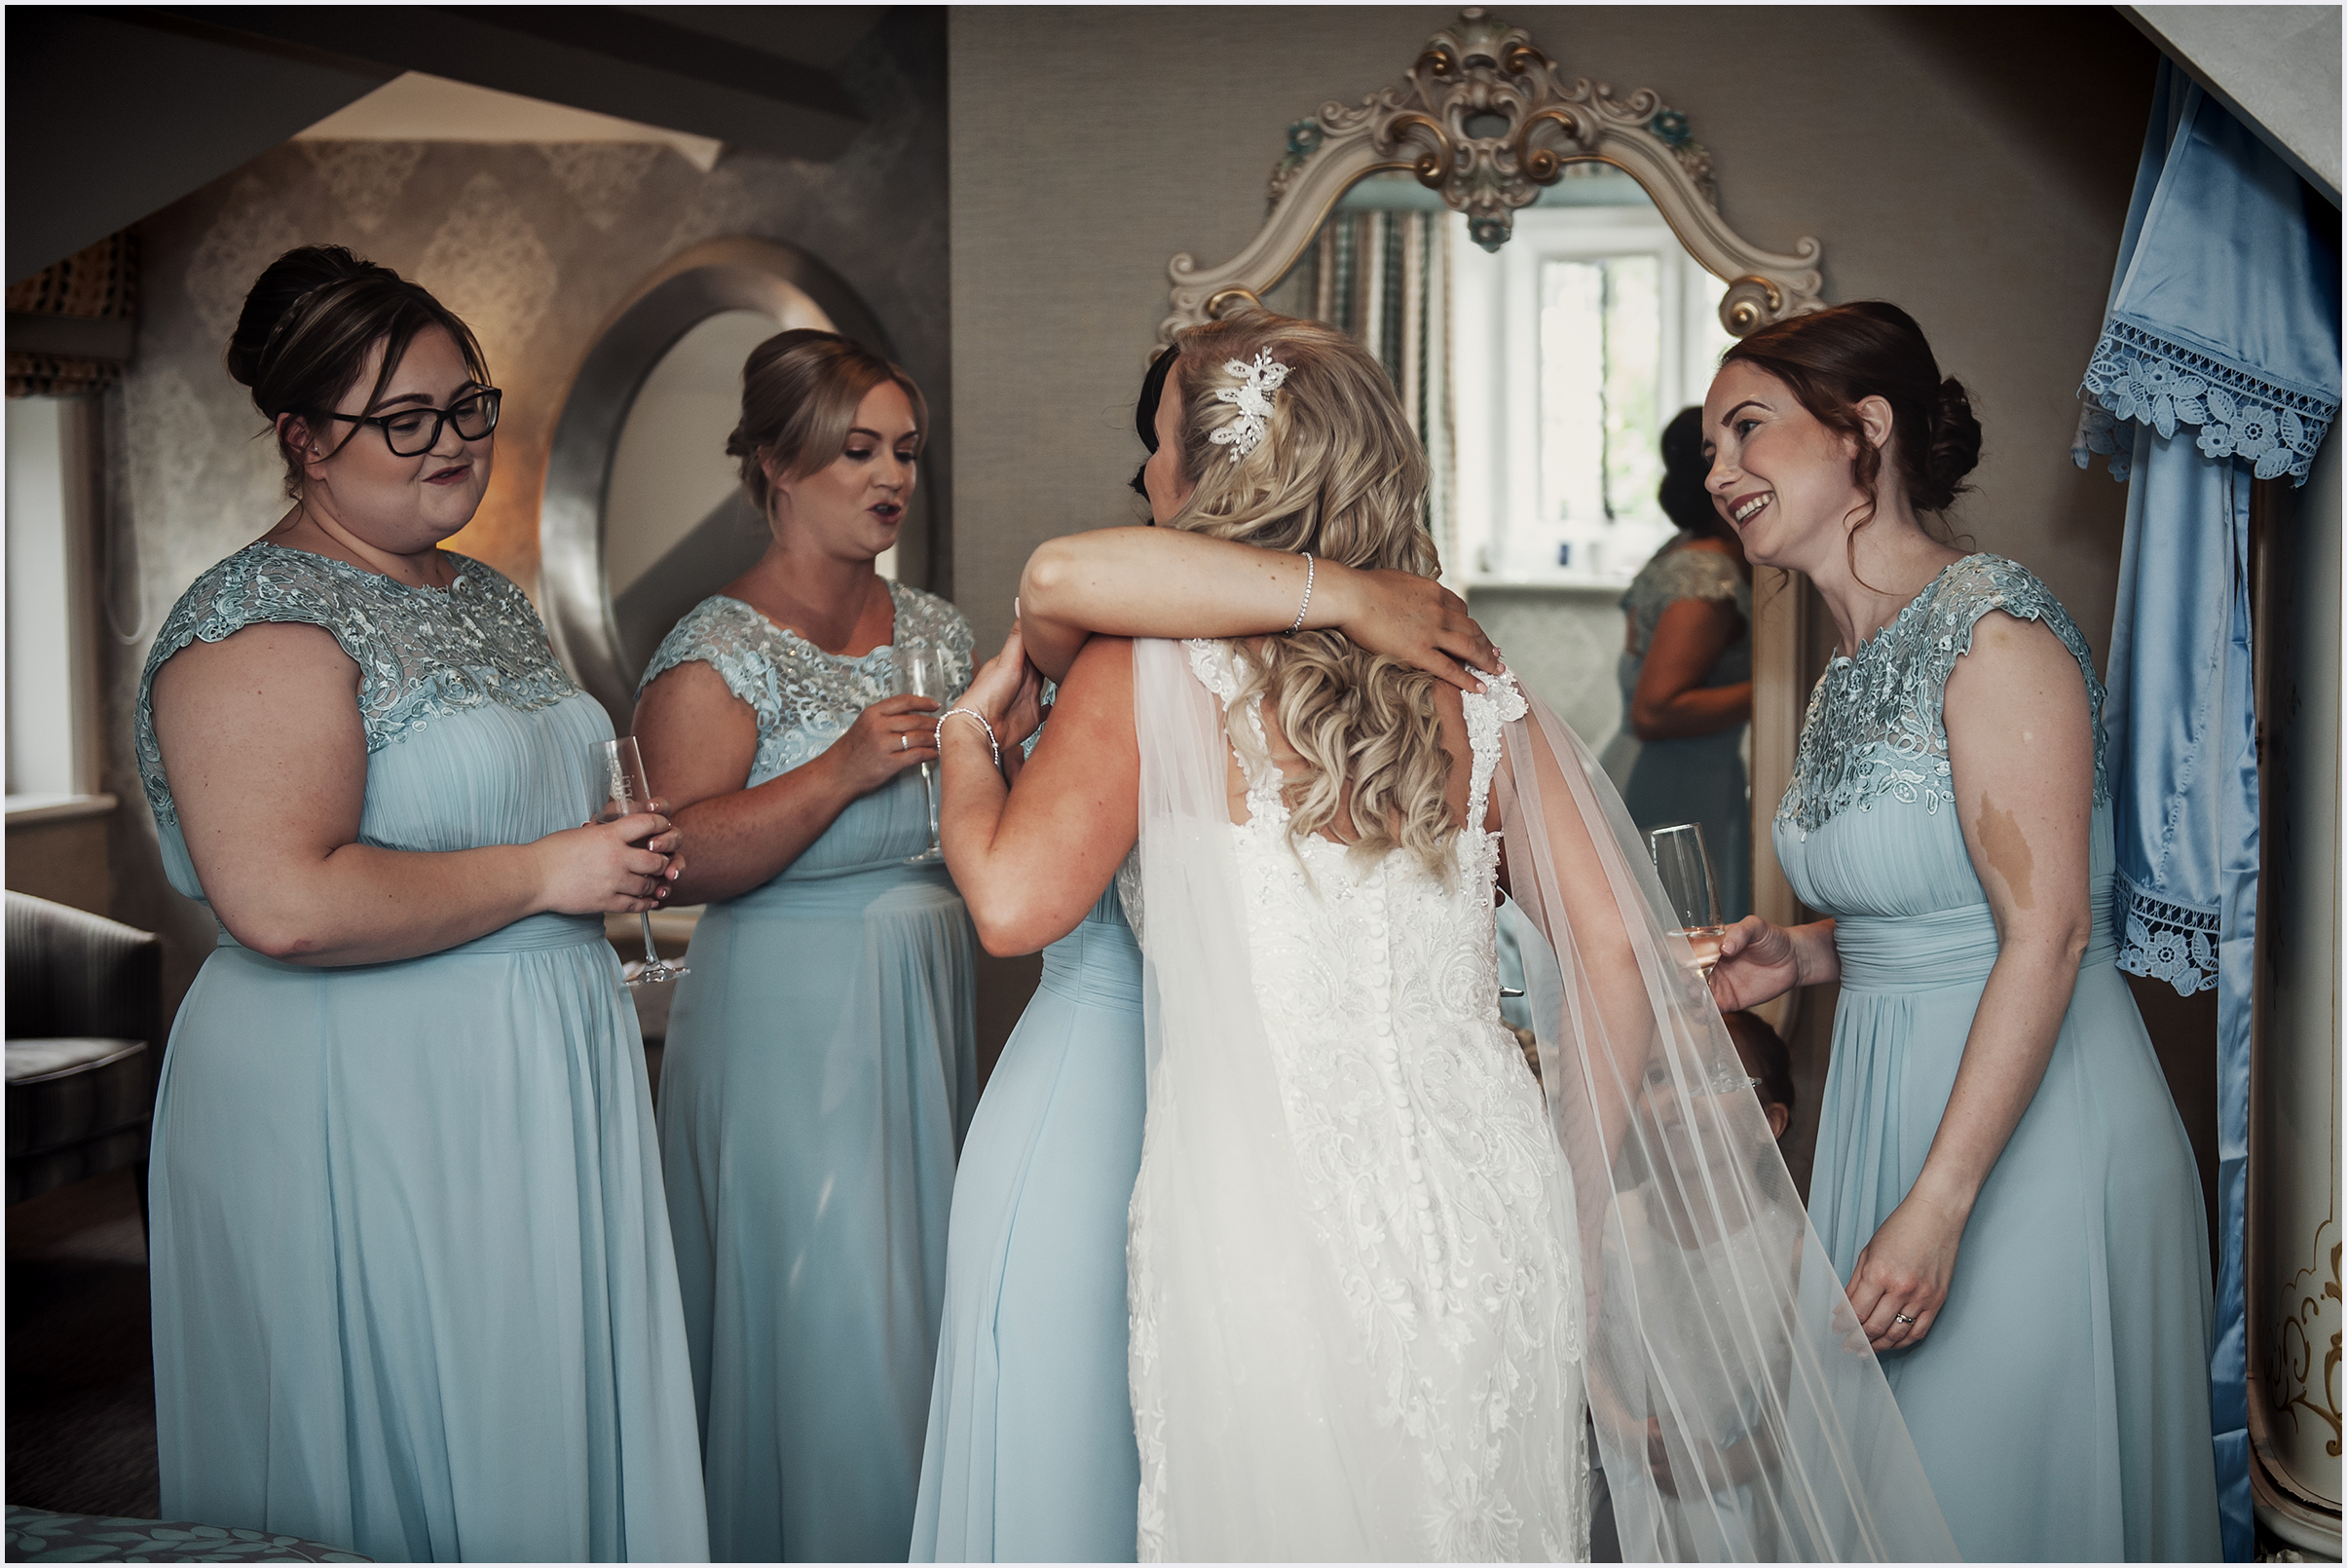 A bride hugs one of her bridesmaids before she marries at The Grosvebor Pulford Hotel and Spa